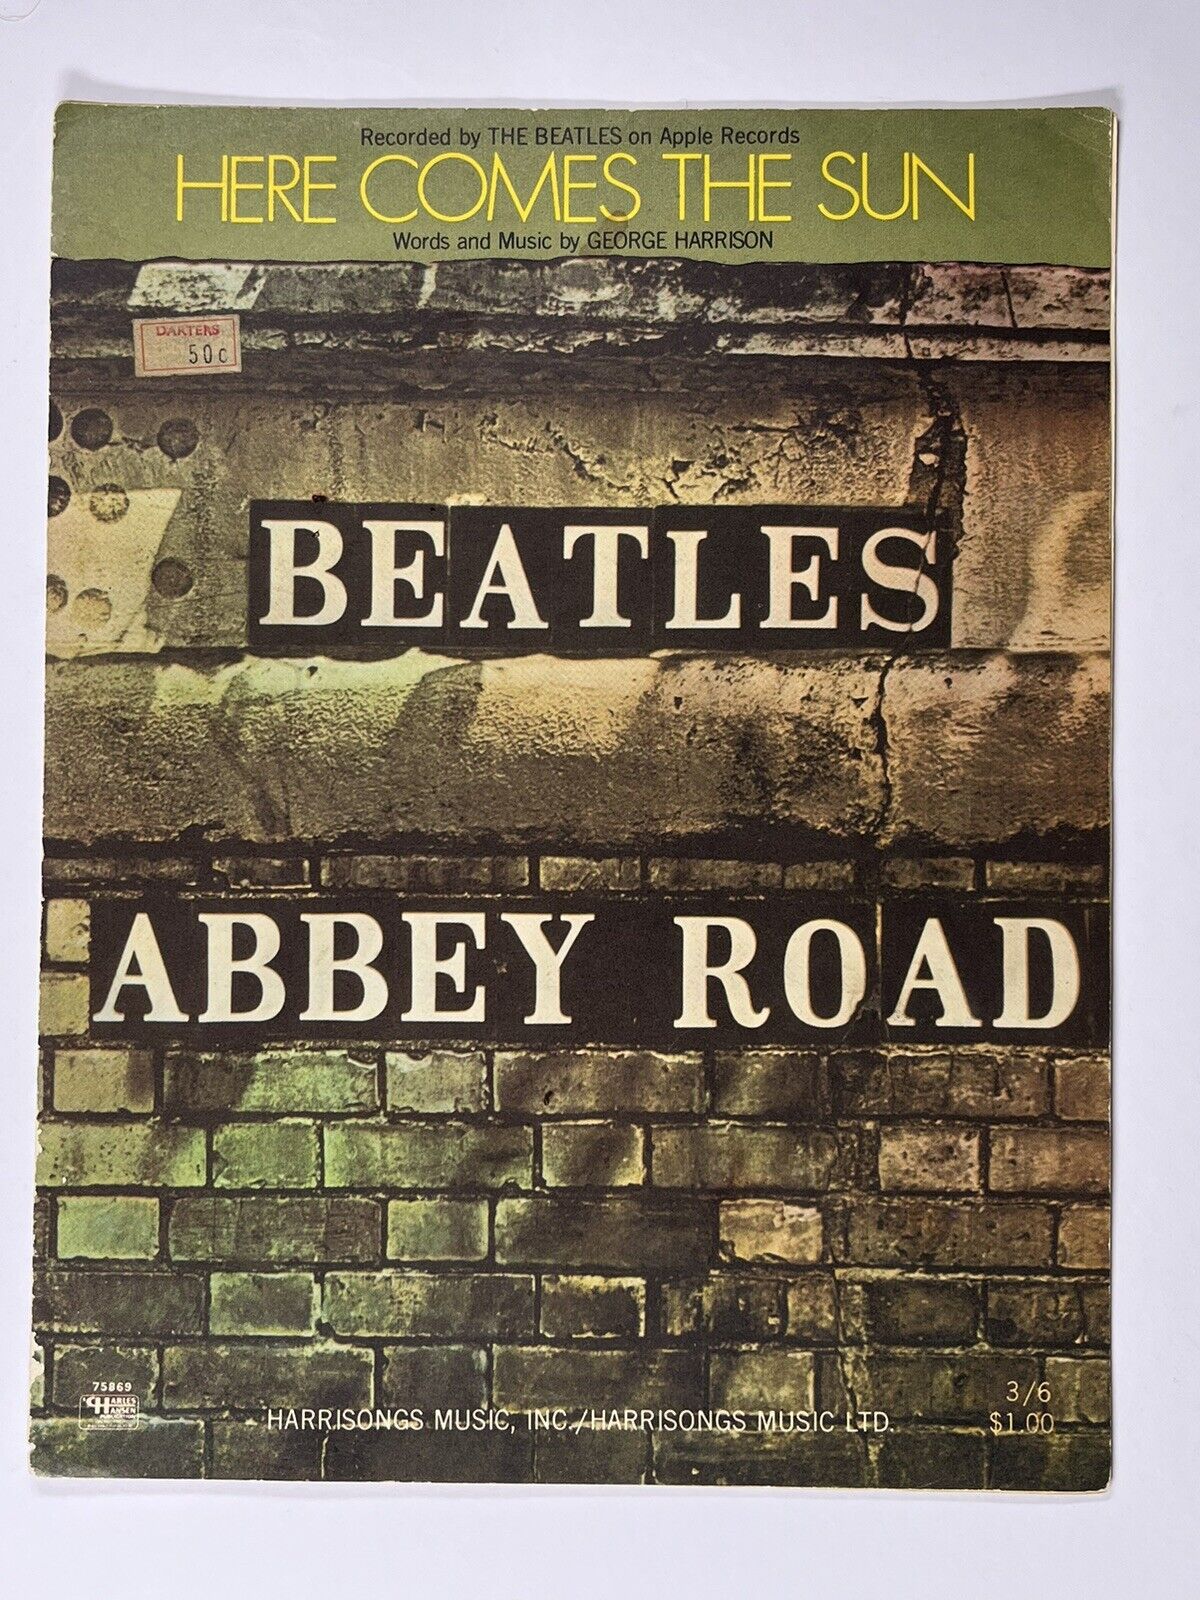 The Beatles Sheet Music George Harrison Abbey Road Orig Here Comes The Sun 69